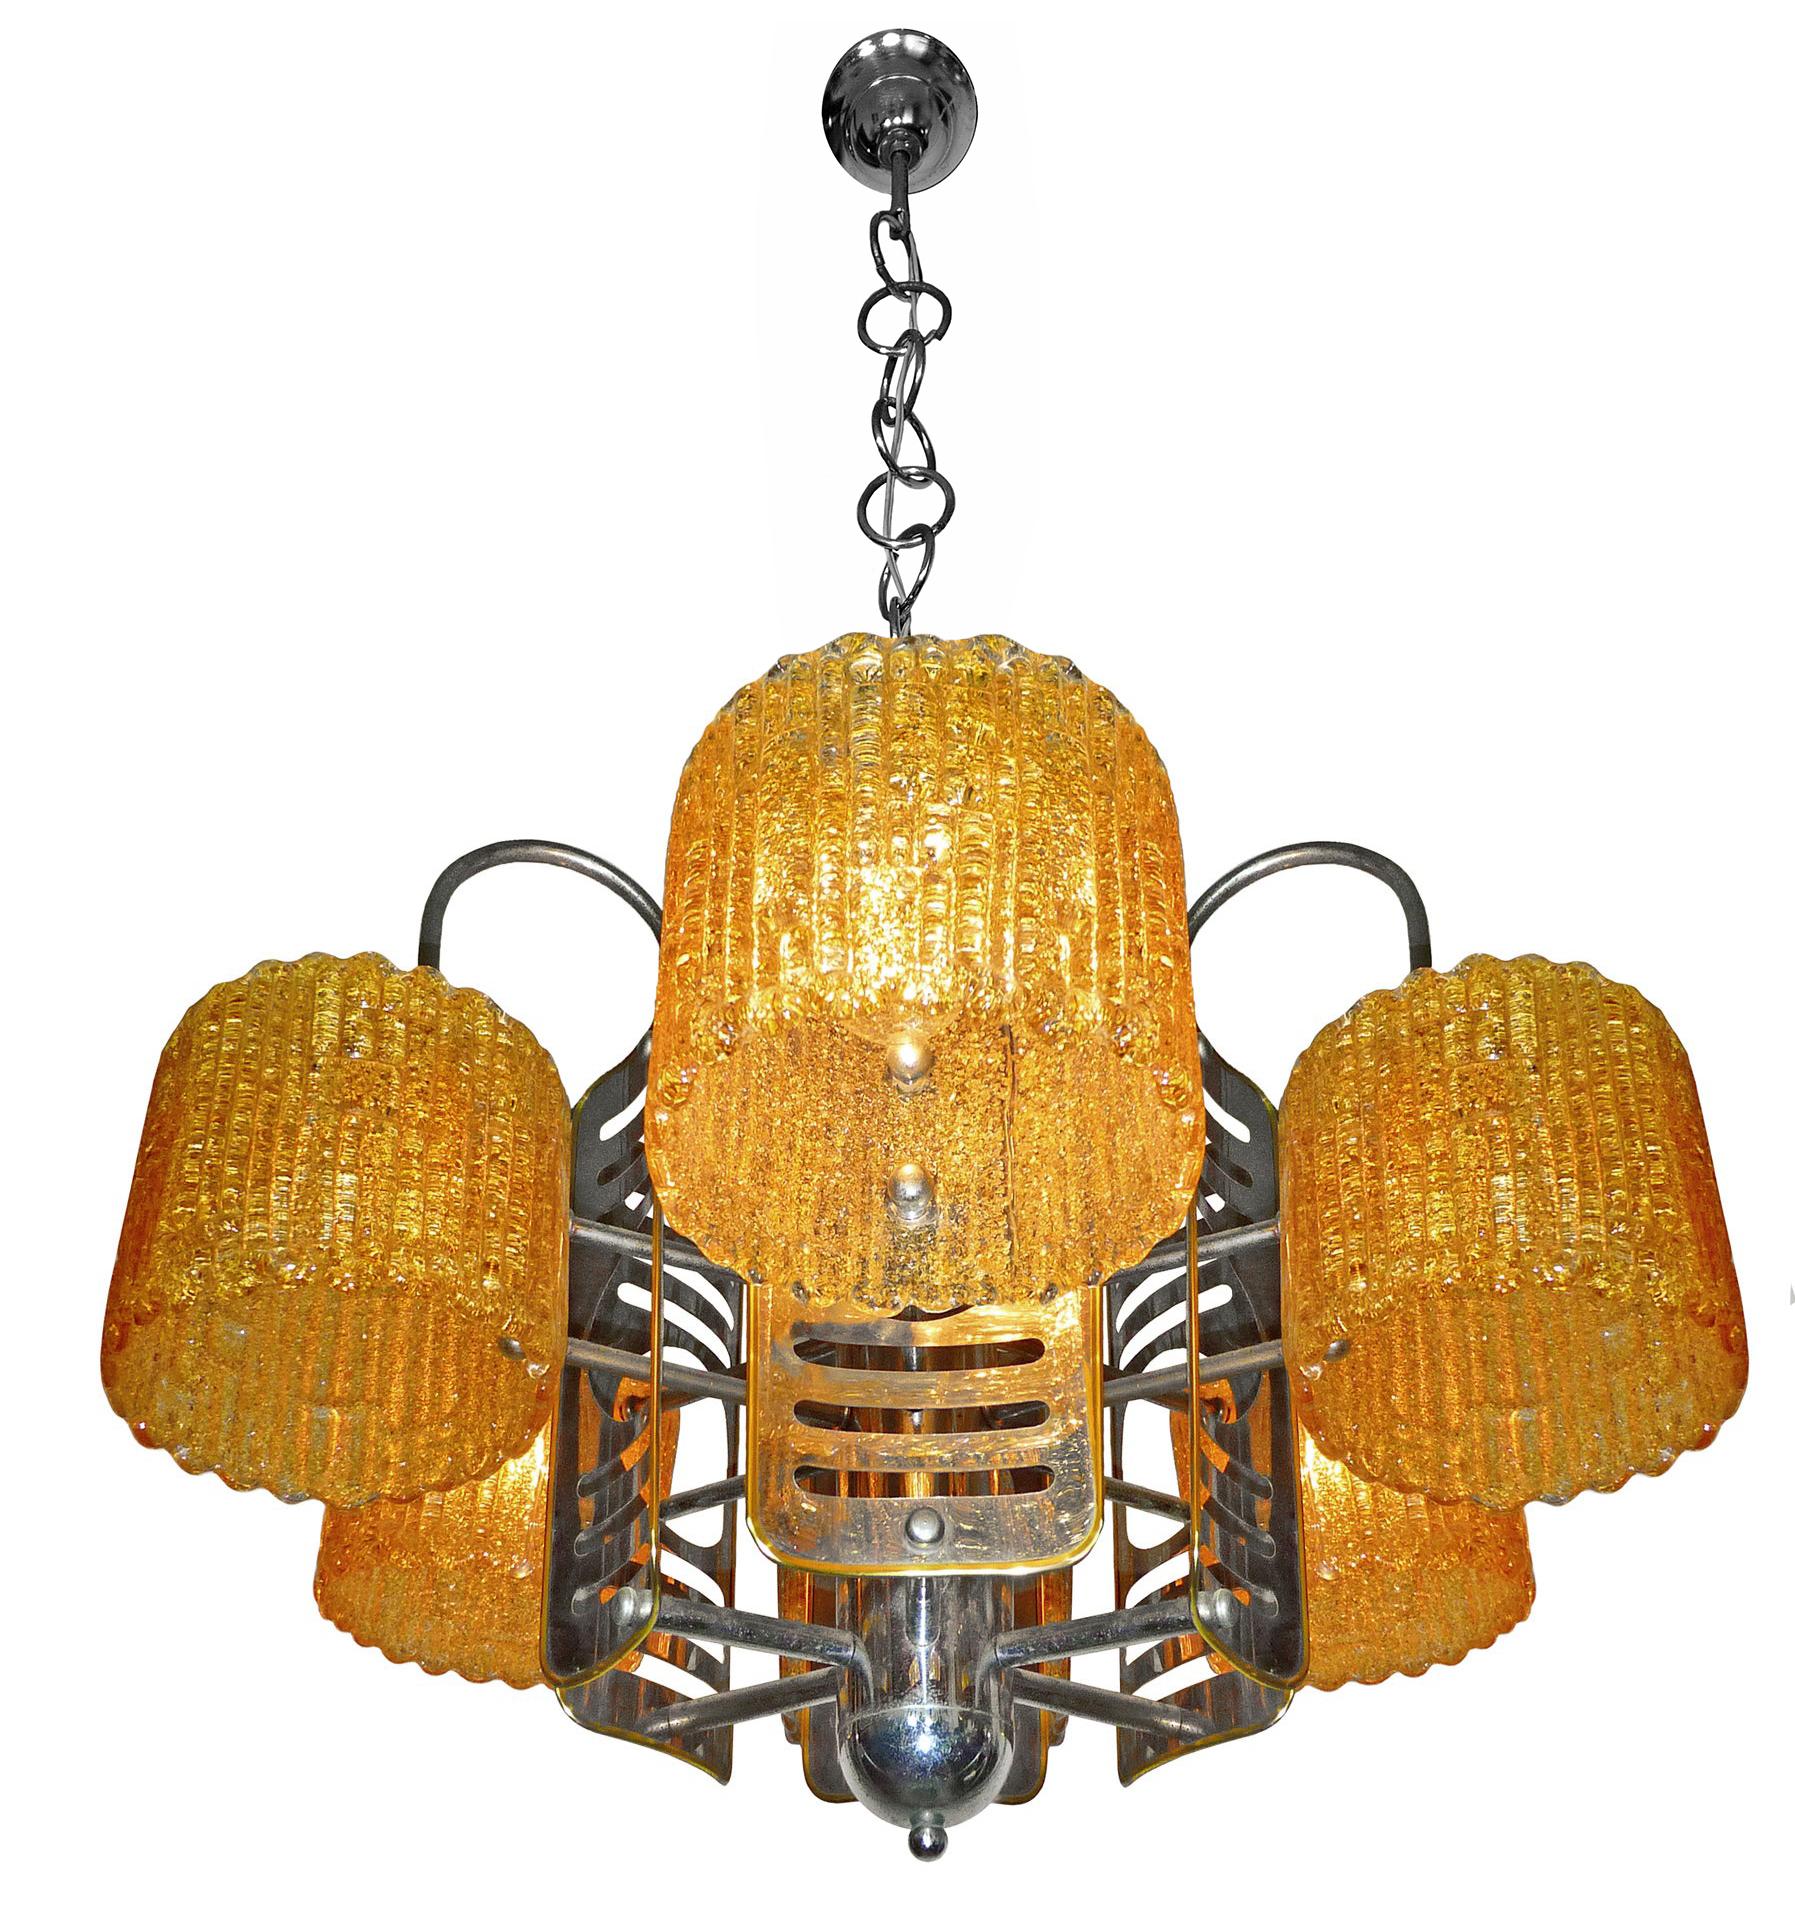 Italian Barovier Toso Style Murano Amber Art Glass & Chrome Sputnik Chandelier In Good Condition For Sale In Coimbra, PT